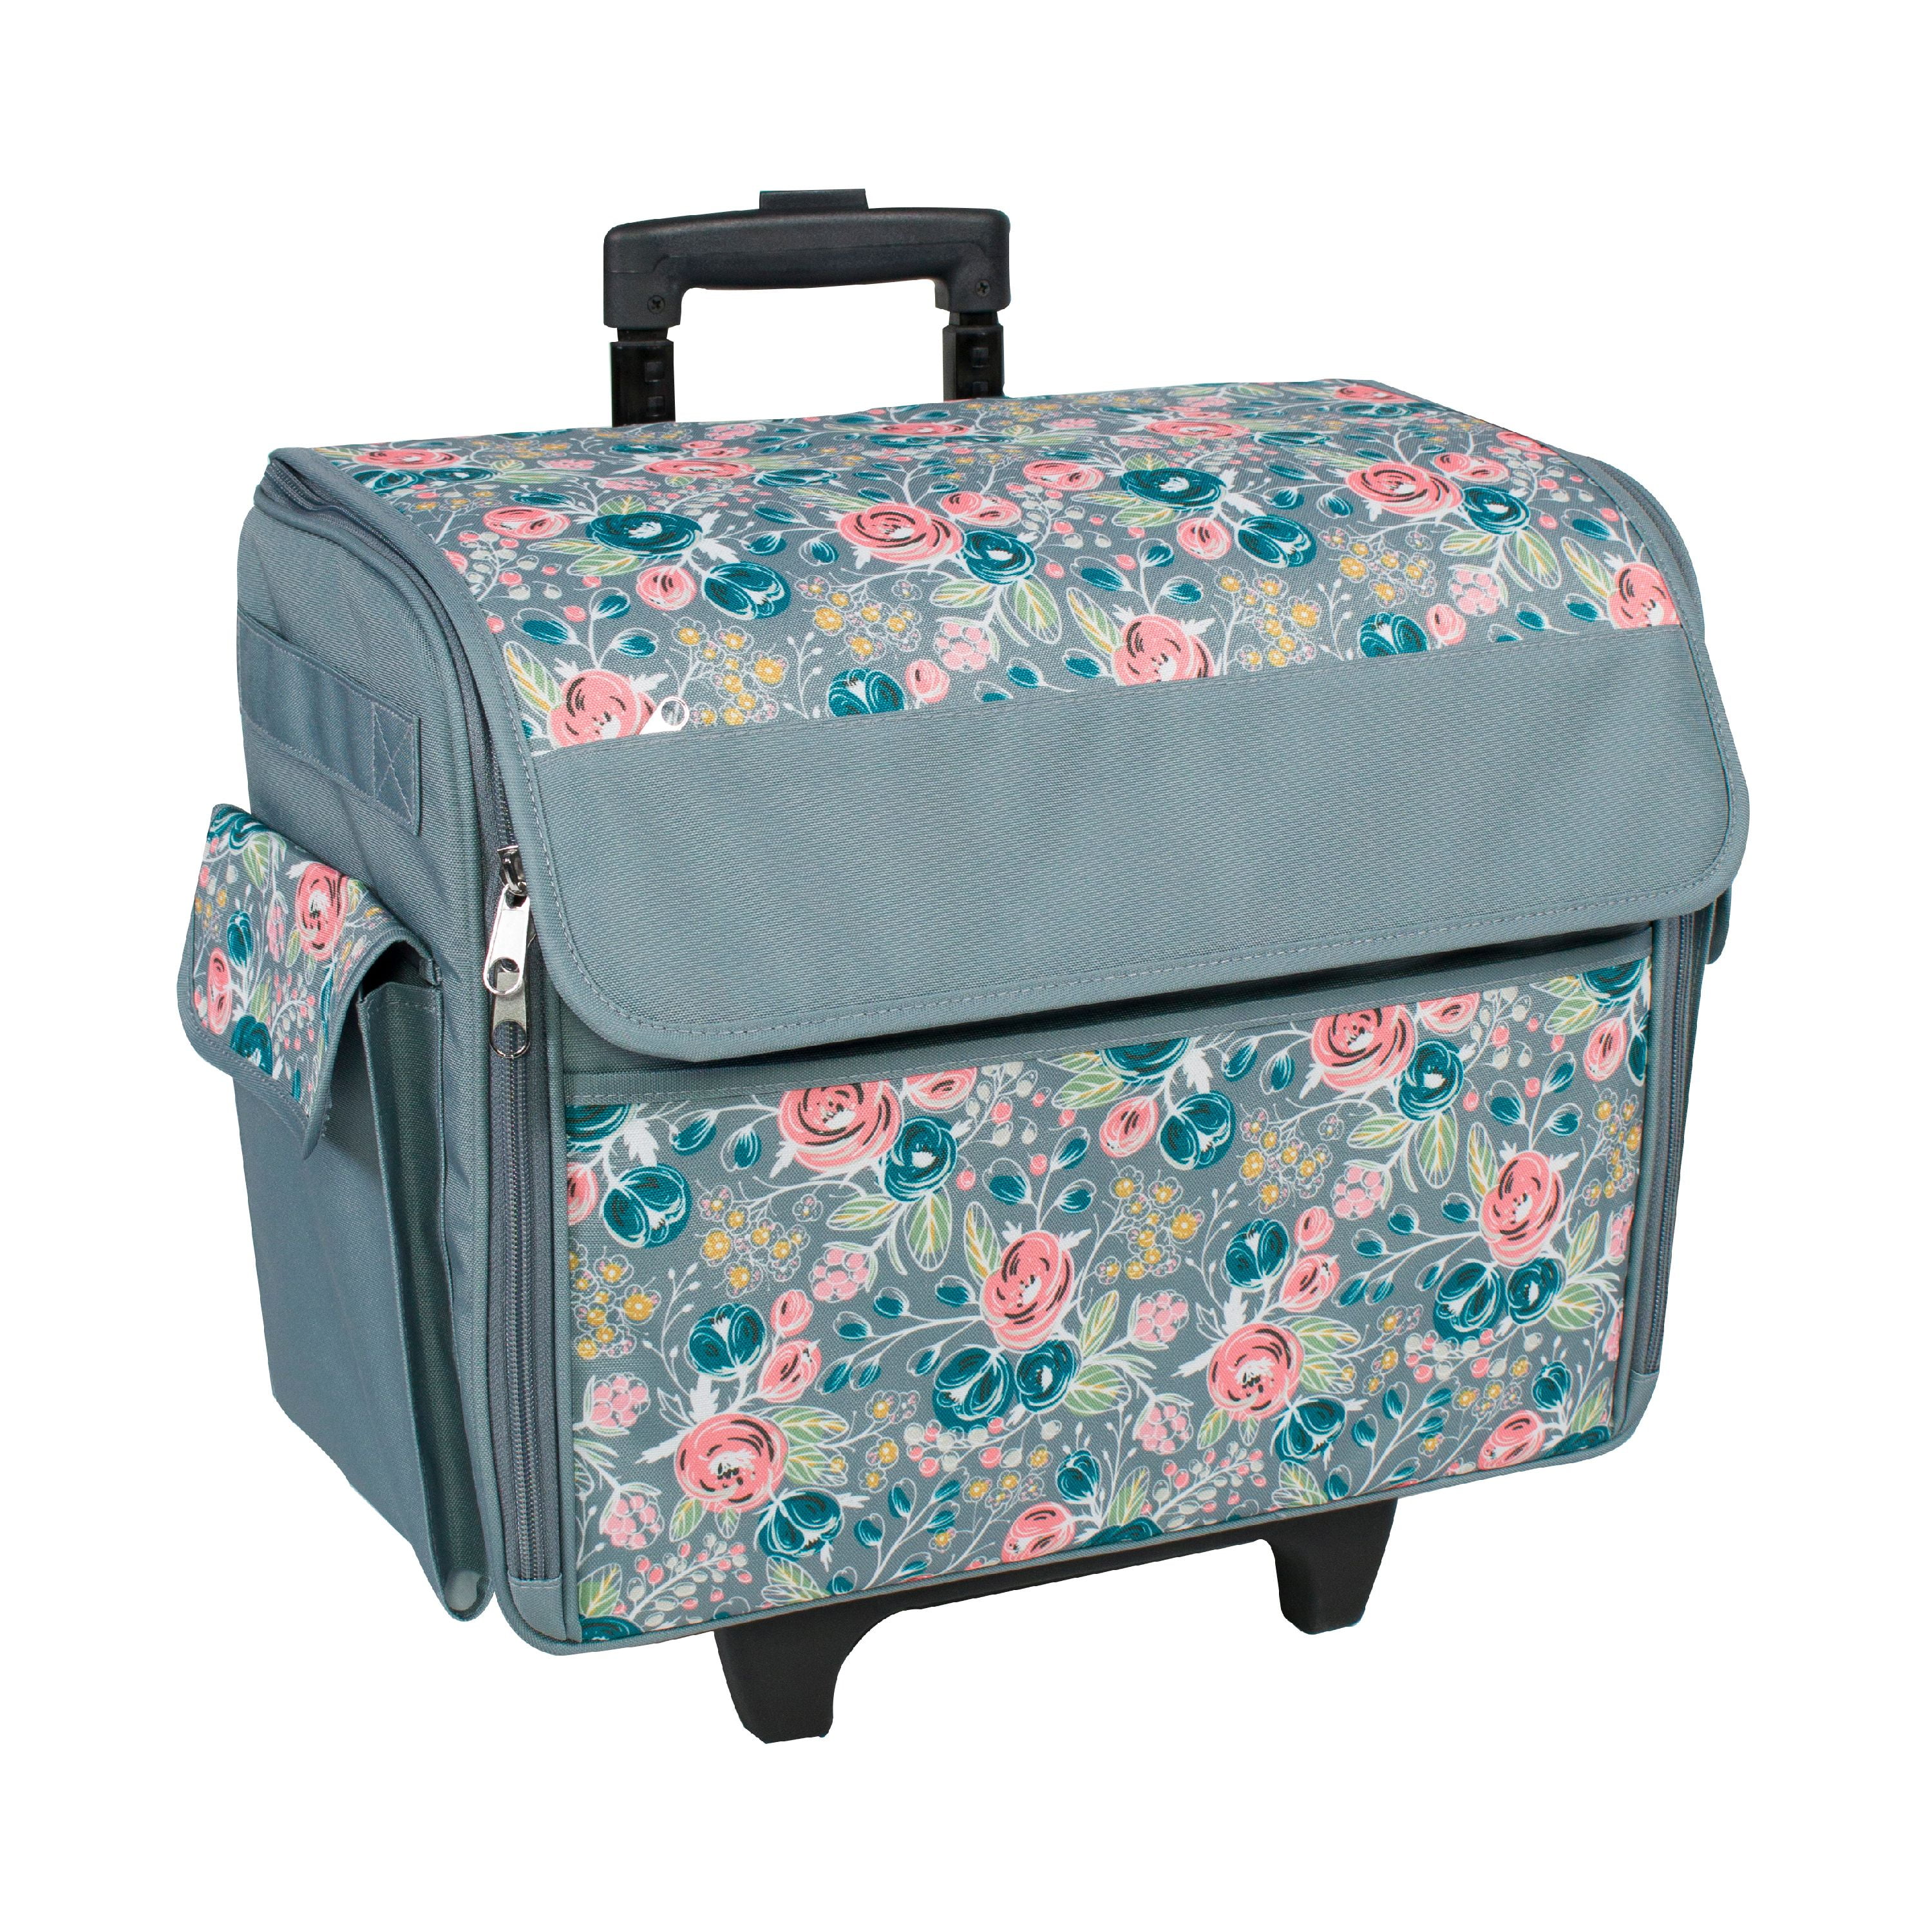 ROLLING SEWING MACHINE TOTE Craft Storage Cart Portable Bag Case ~ 3 CHOICES 